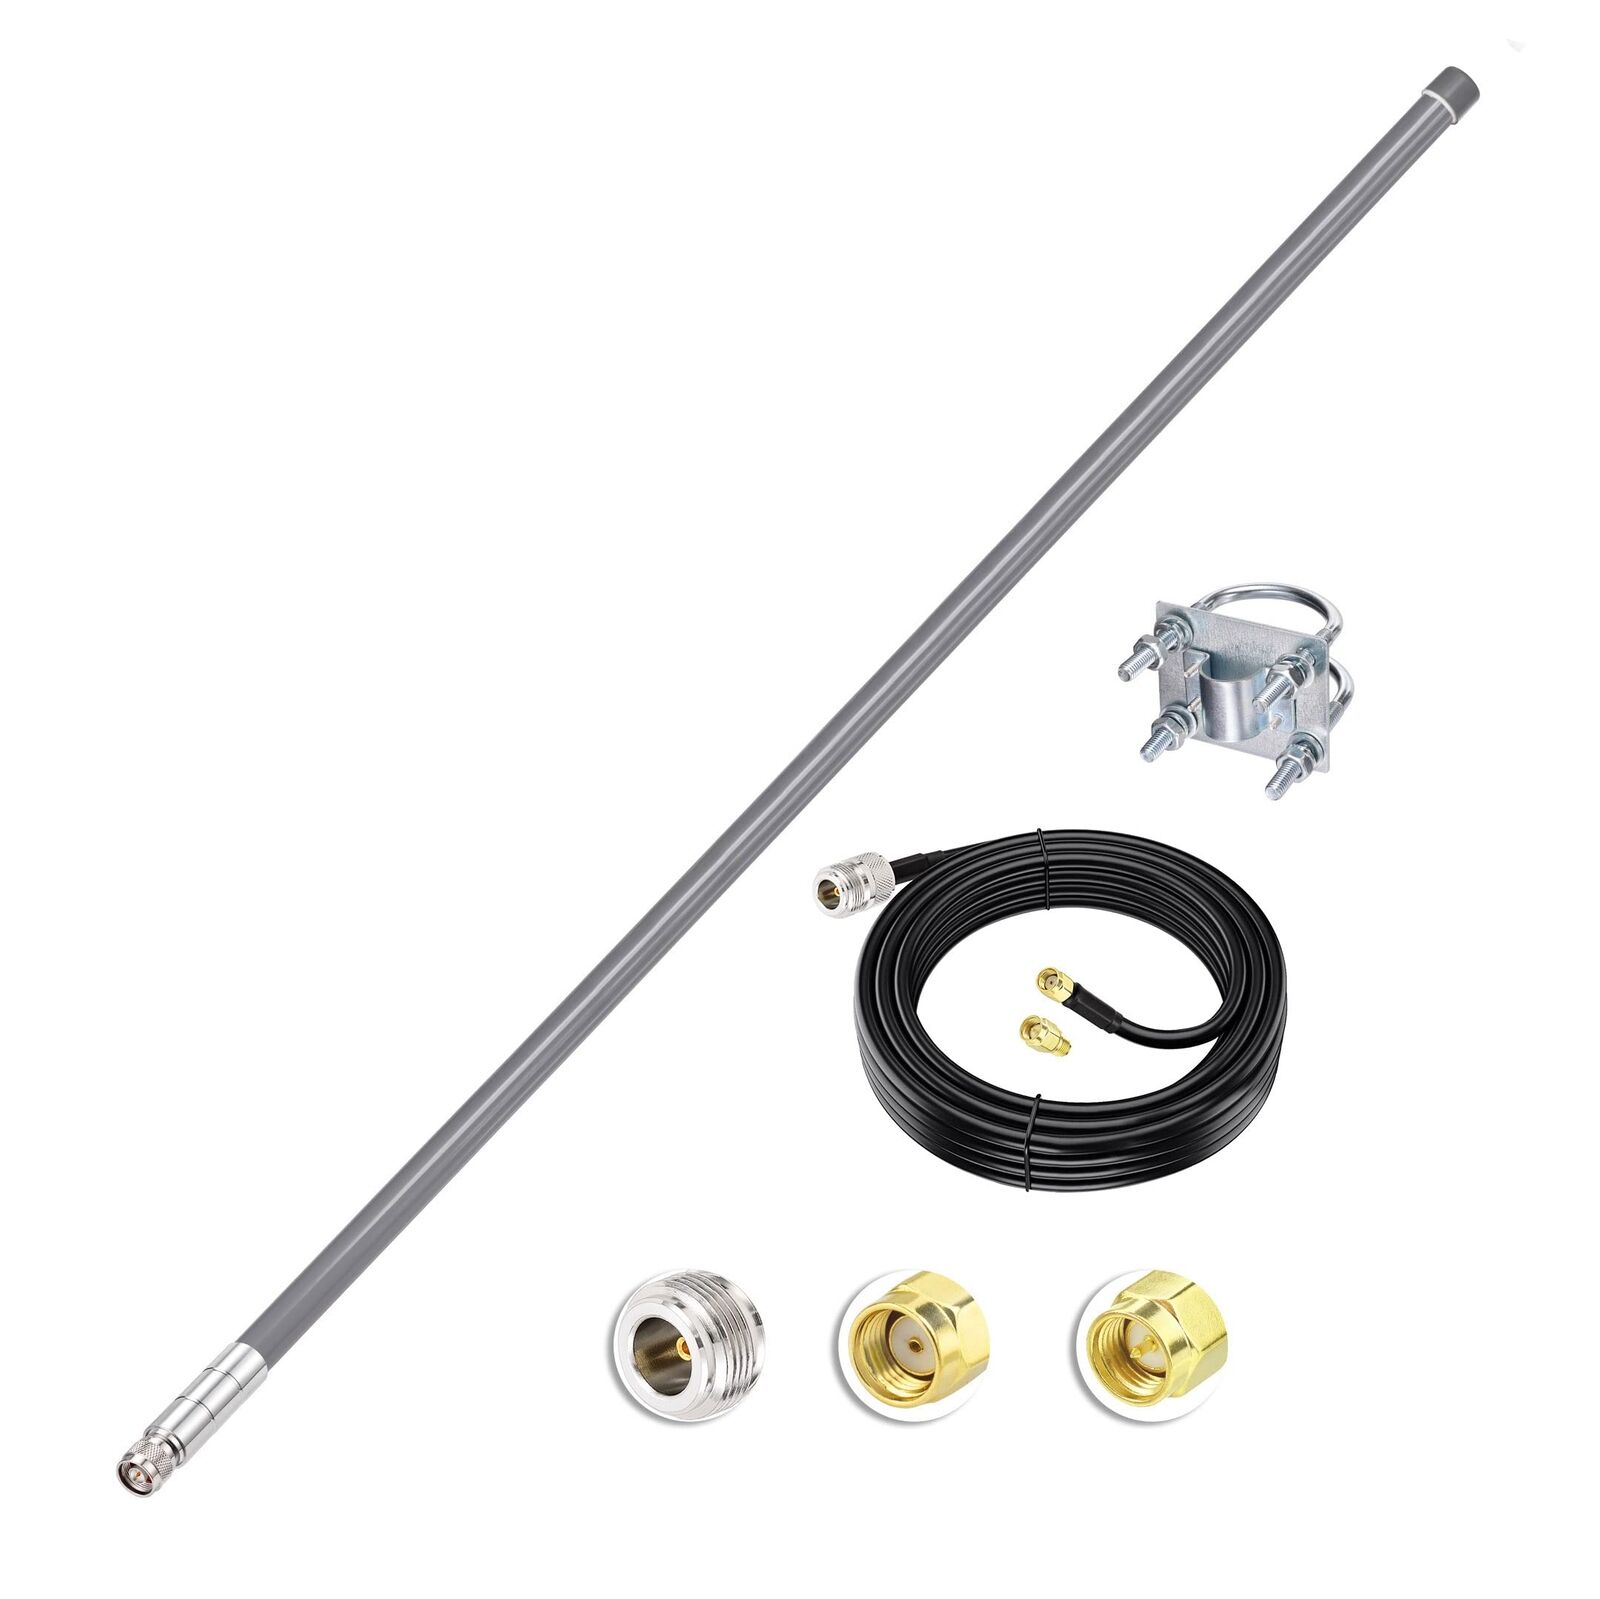 43.3inch 8dBi 915MHz Helium HNT Lora Antenna - 10ft ALSR240 Low Loss Cable - ...